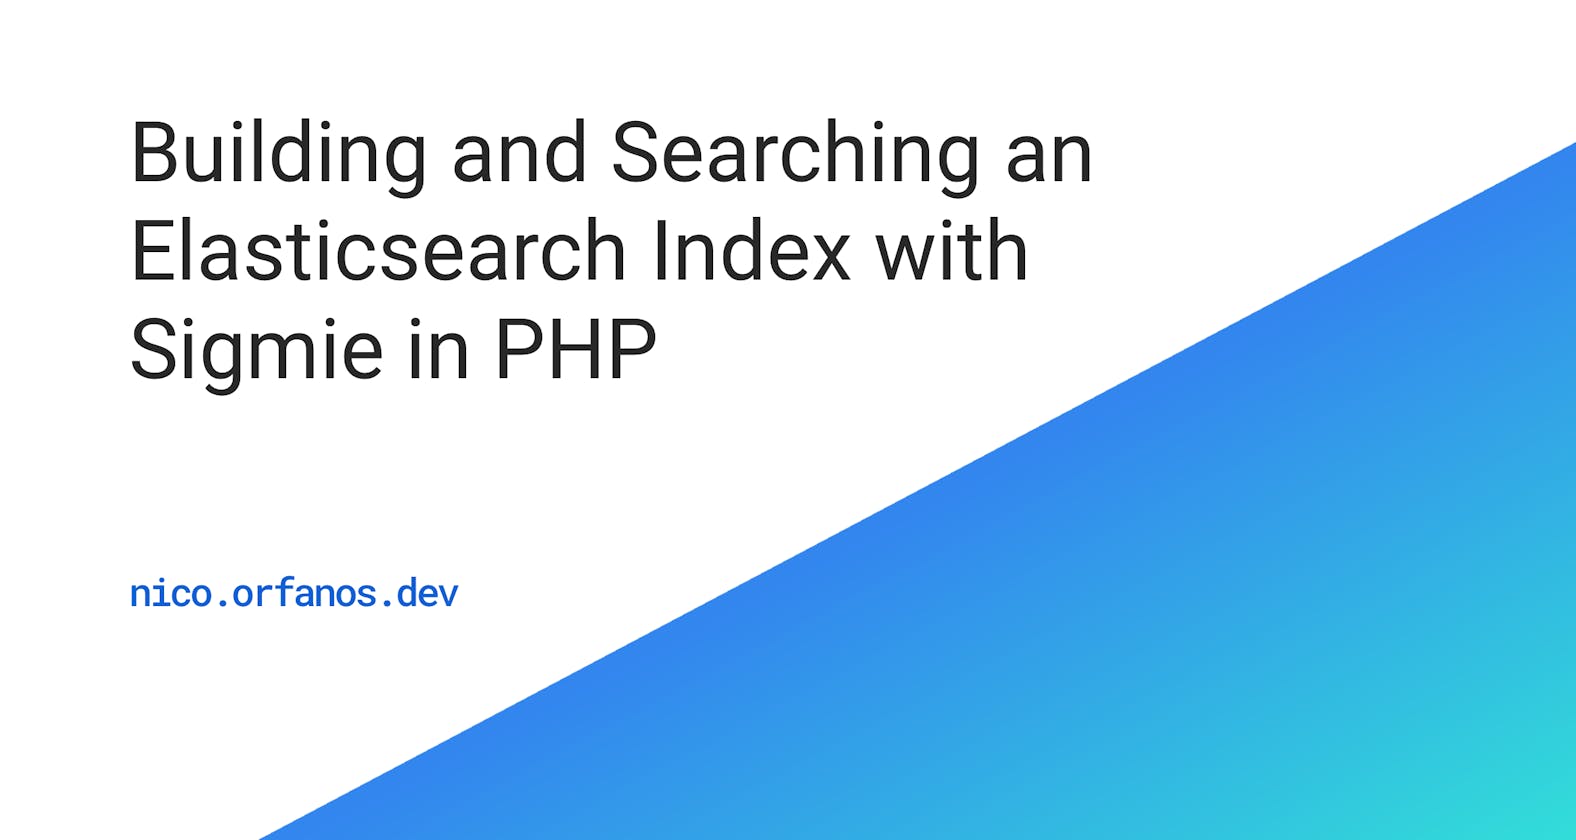 Building and Searching an Elasticsearch Index with Sigmie in PHP